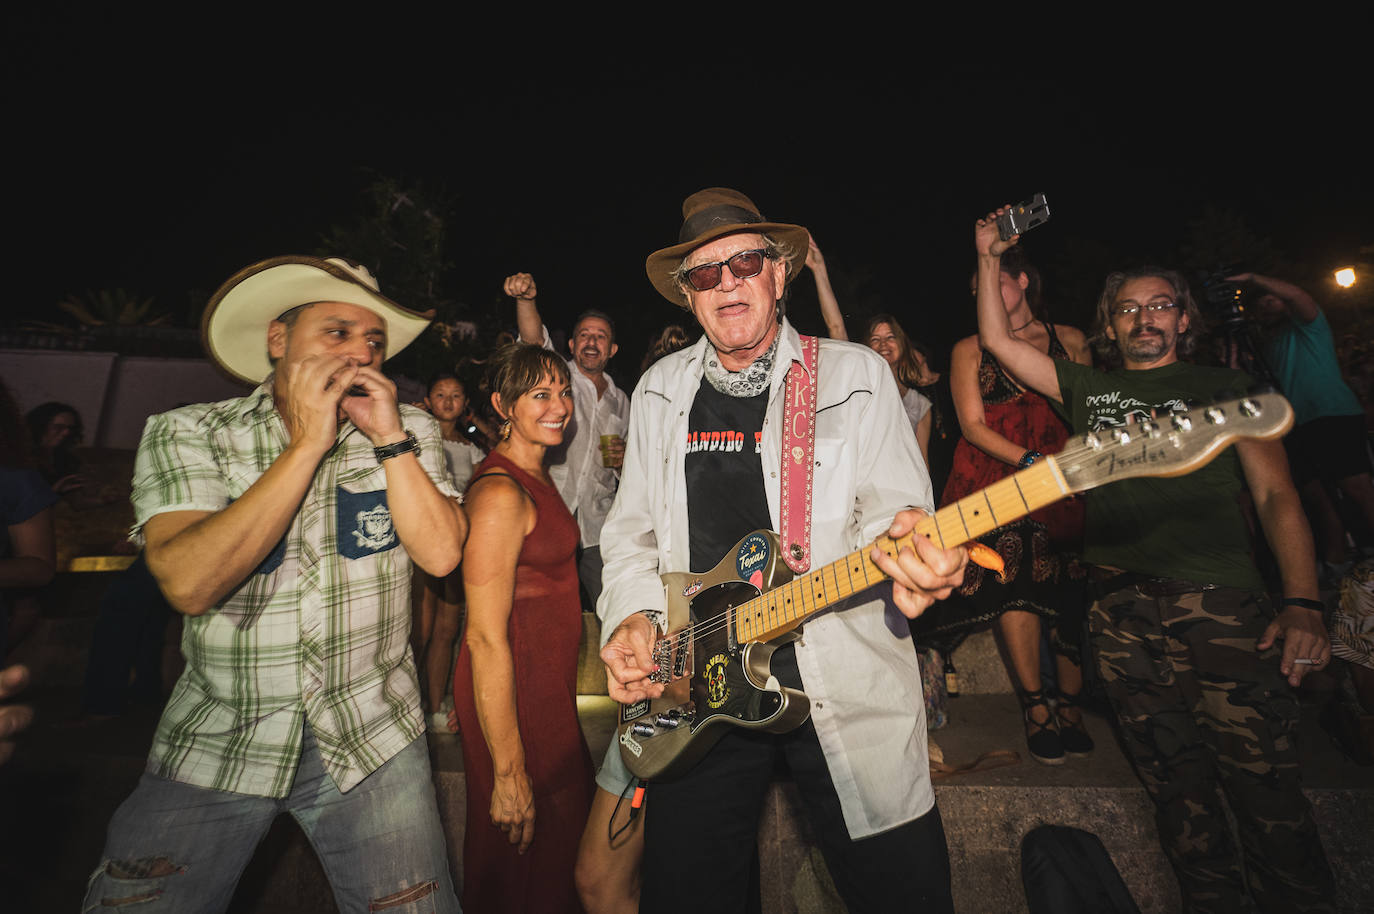 More than 60 musicians, most of them international bands from the United States, performed in Ronda, Montejaque, Grazalema and Villaluenga del Rosario